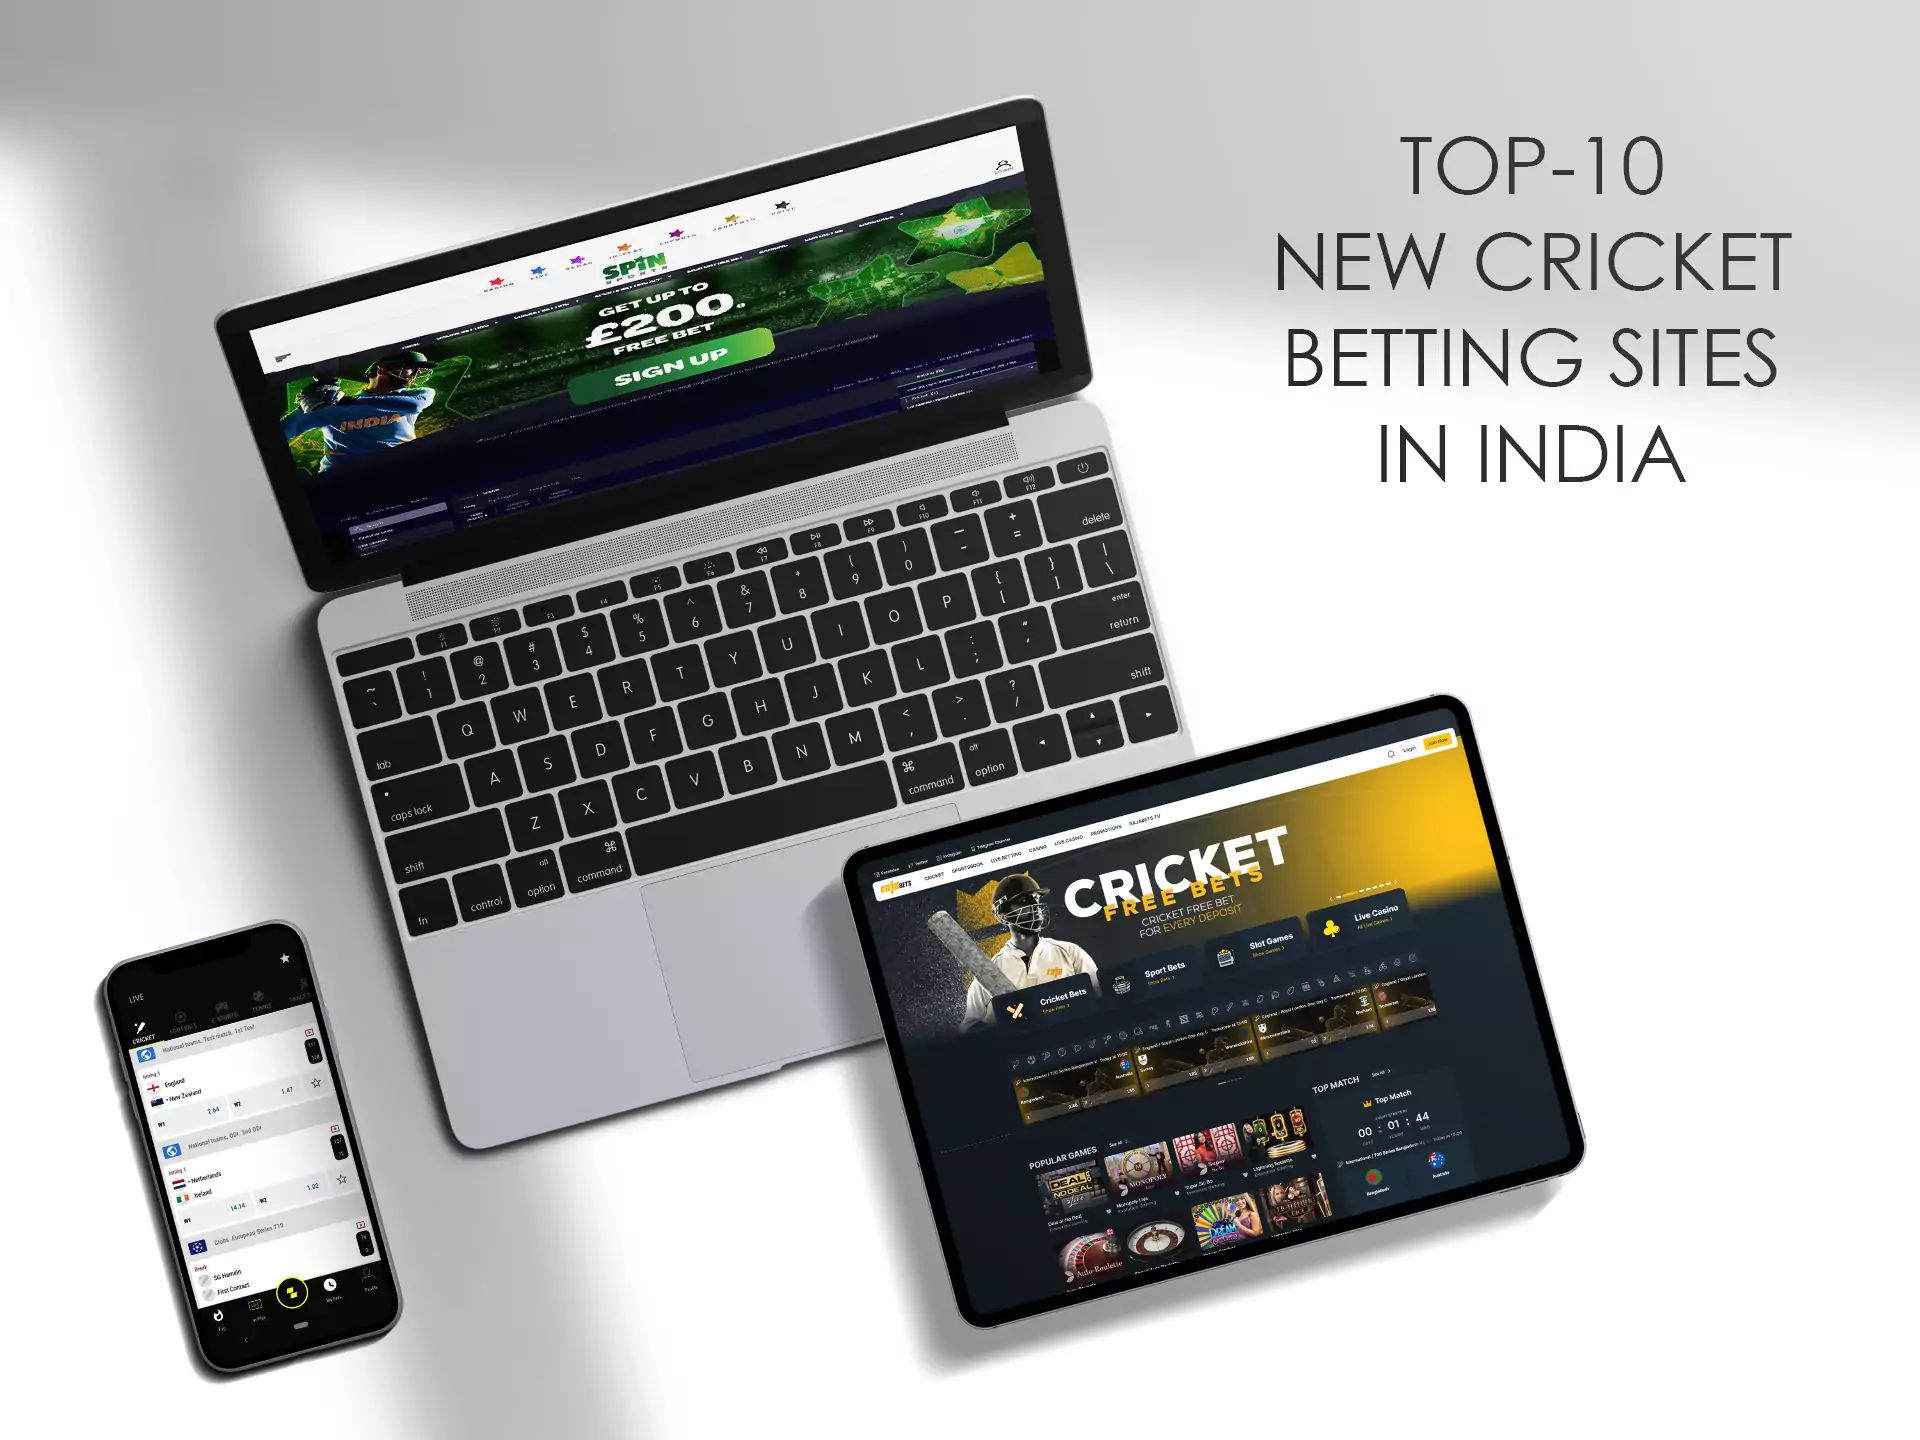 New cricket betting sites are always checked by our experts.